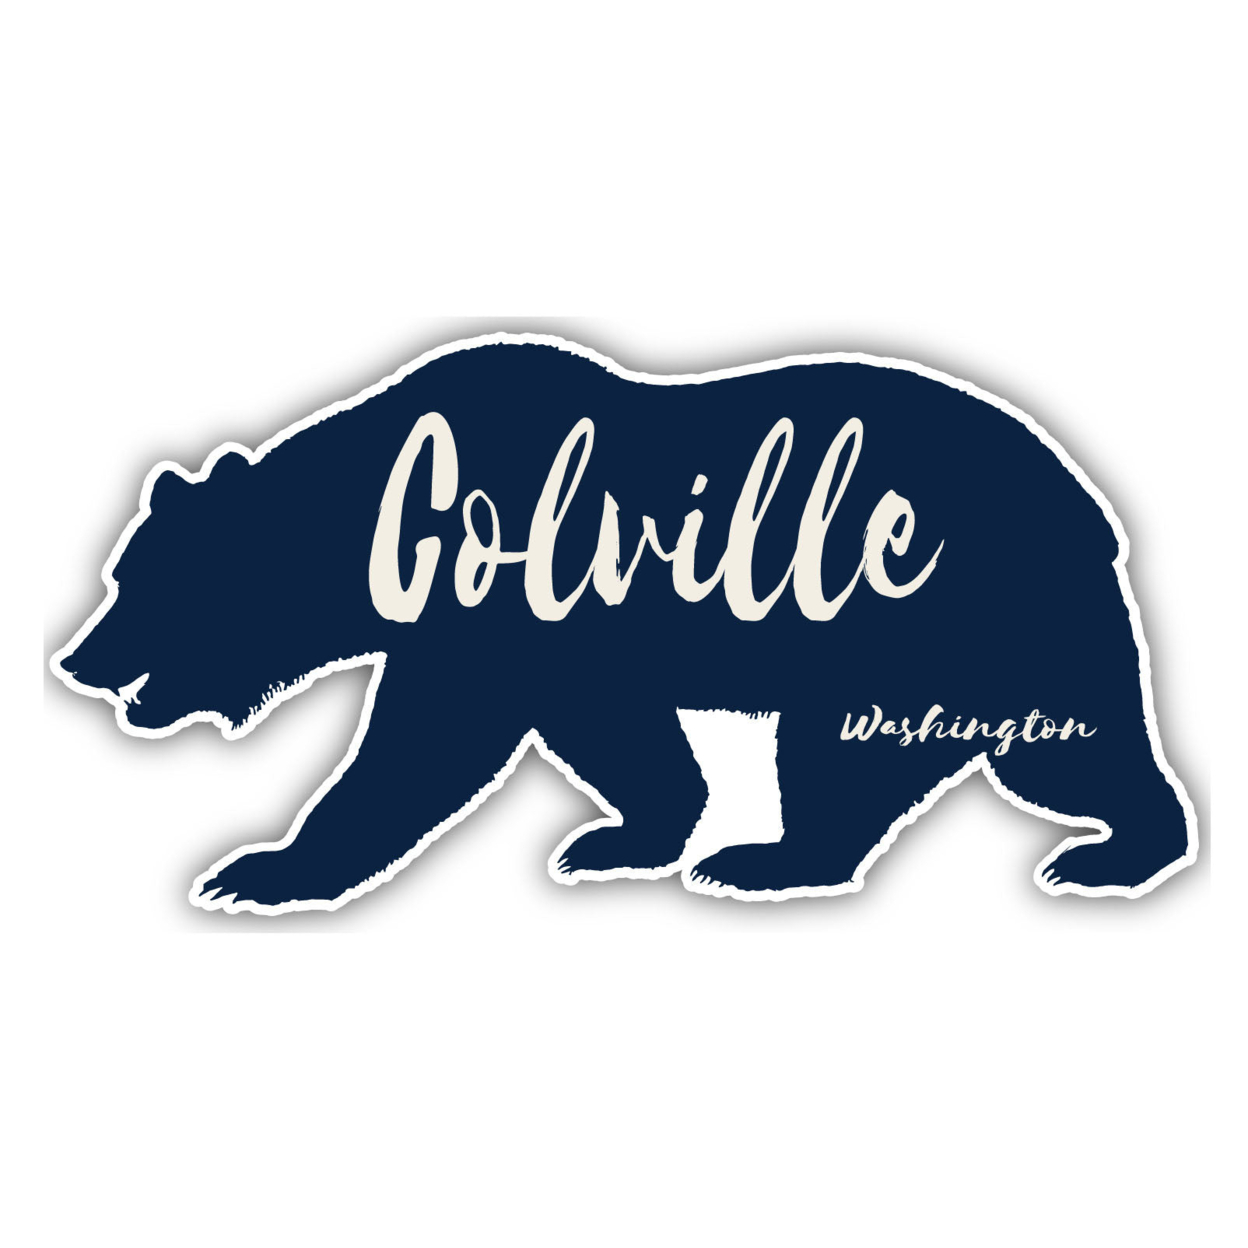 Colville Washington Souvenir Decorative Stickers (Choose Theme And Size) - 4-Pack, 12-Inch, Great Outdoors